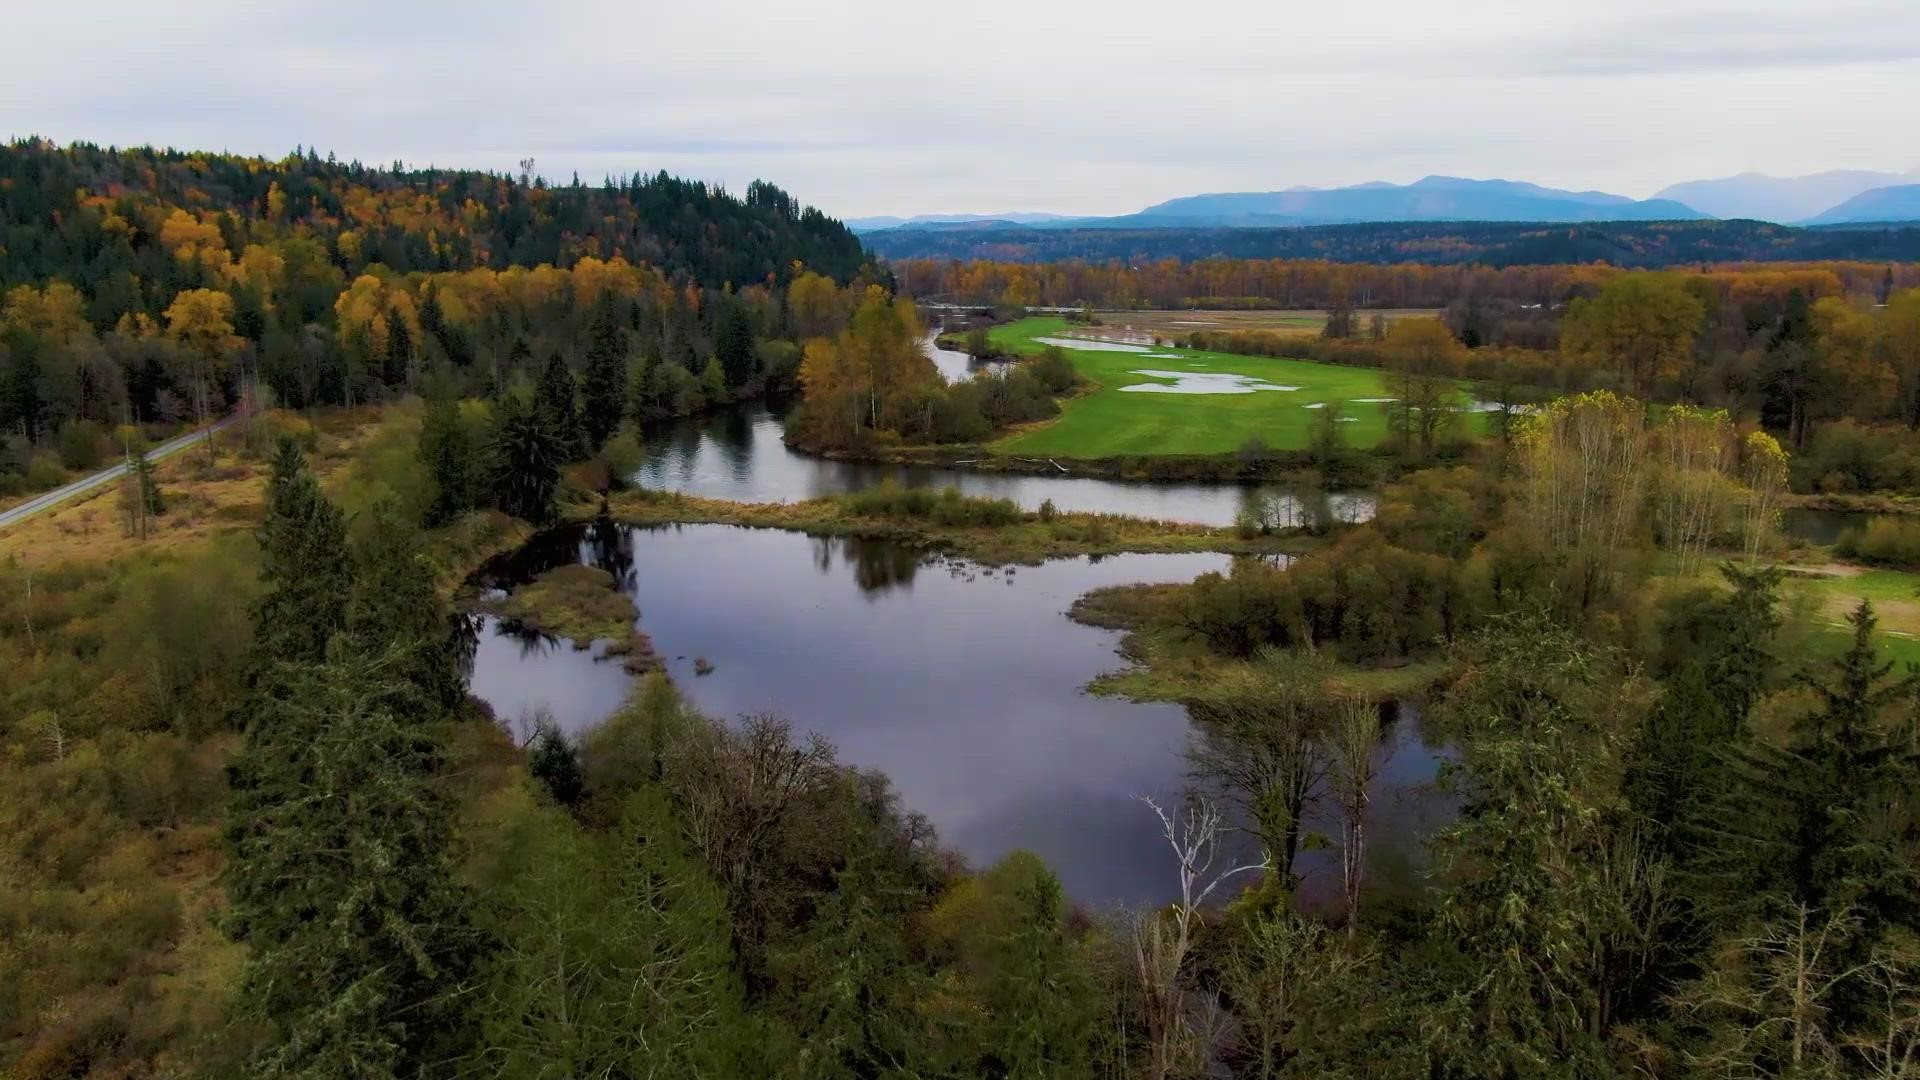 KING 5’s drone “Dexter” flew over Carnation Marsh and Fall City near the Snoqualmie River on Nov. 3, 2021